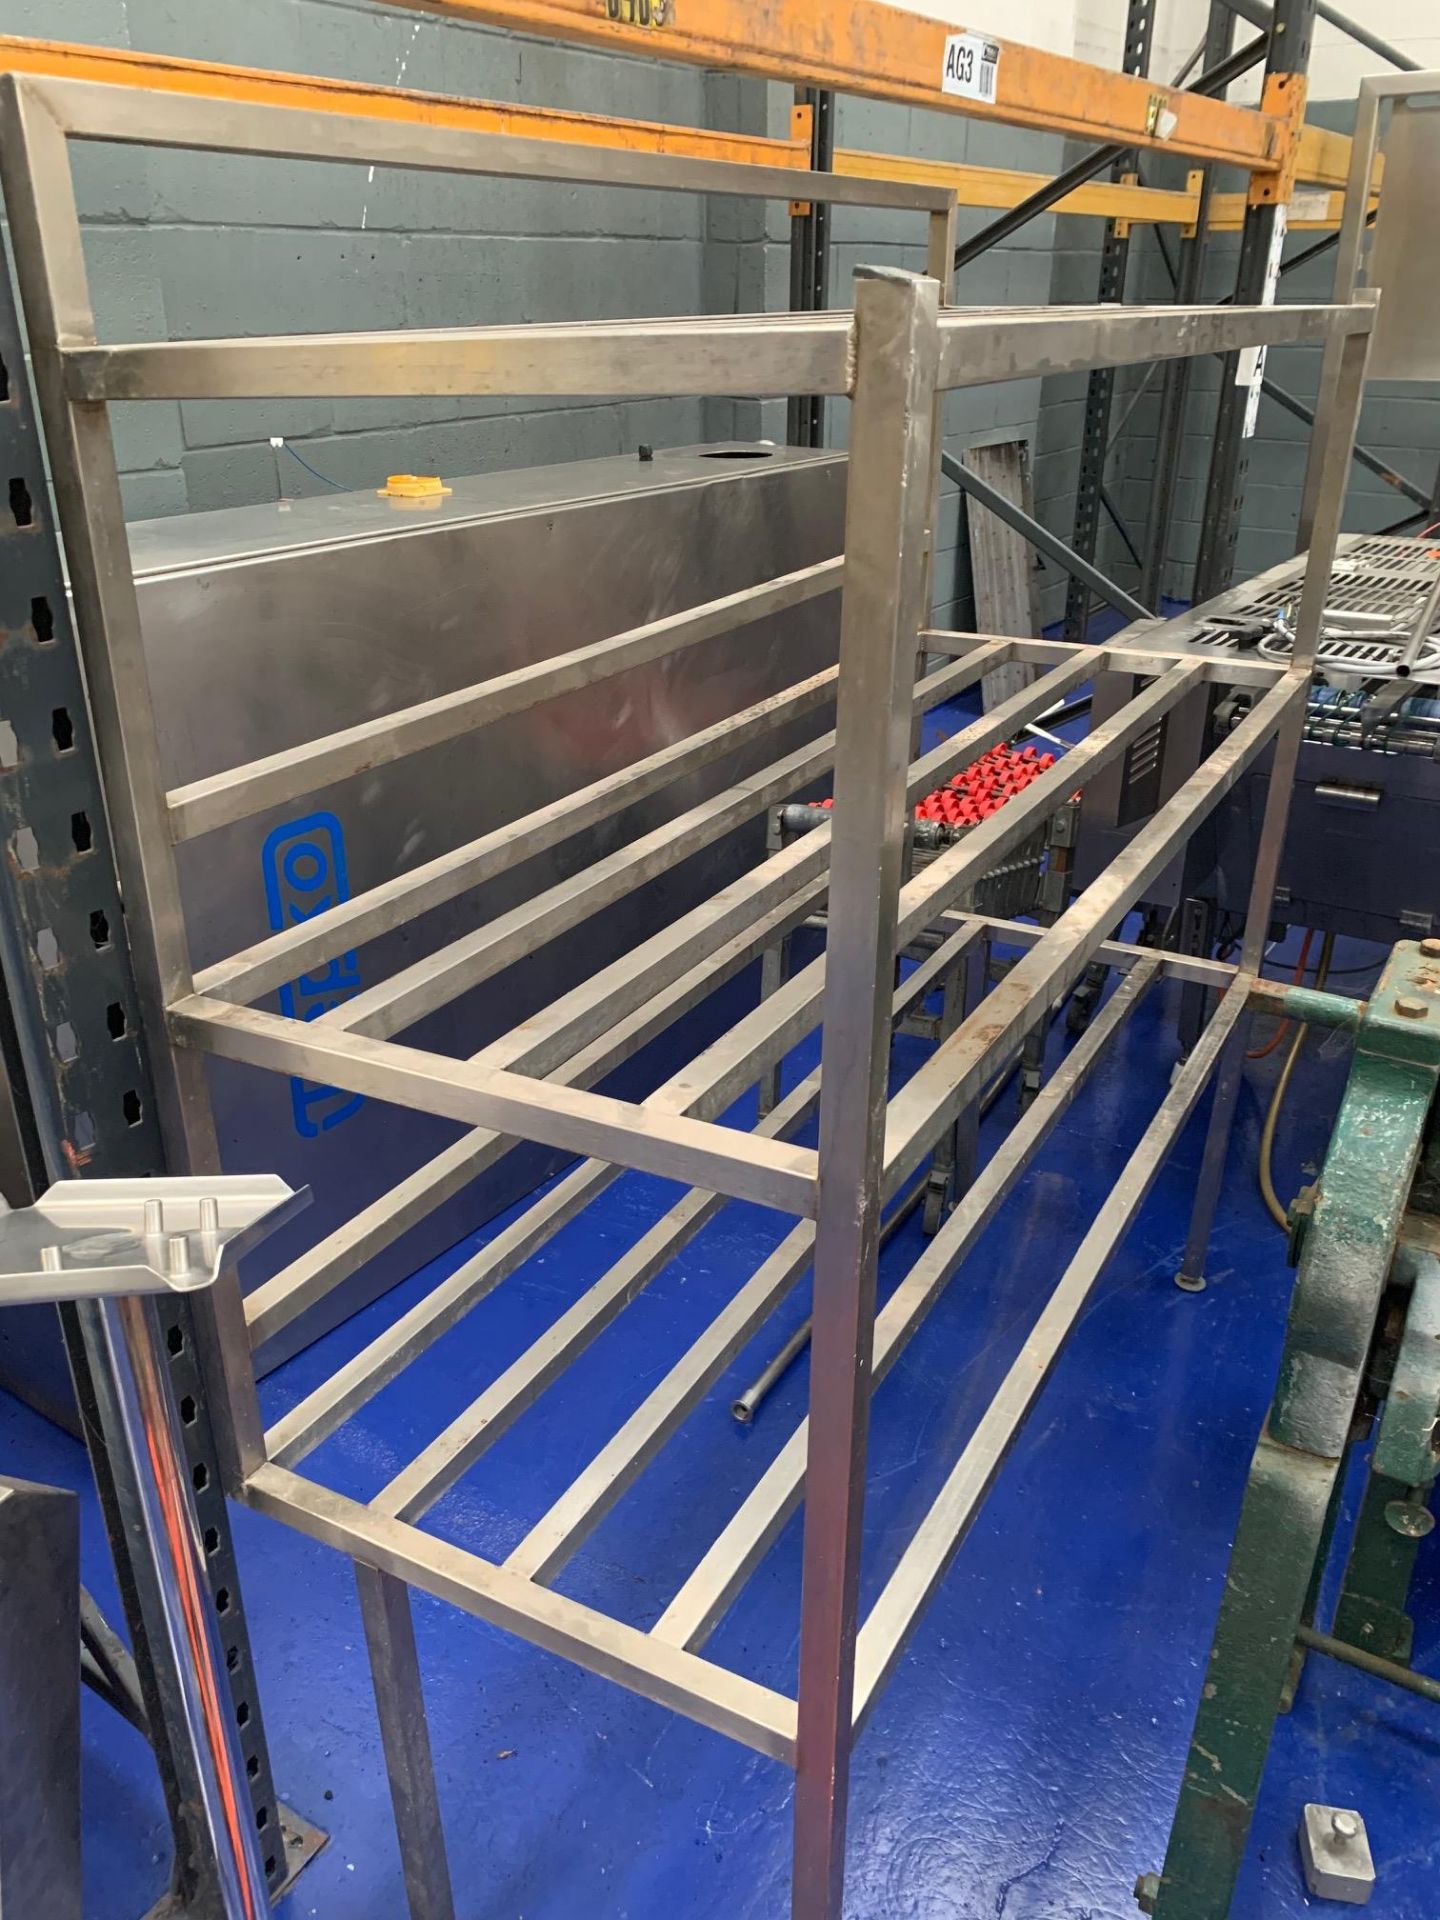 3 tier stainless steel racking approx 6ft long designed to mount against wall